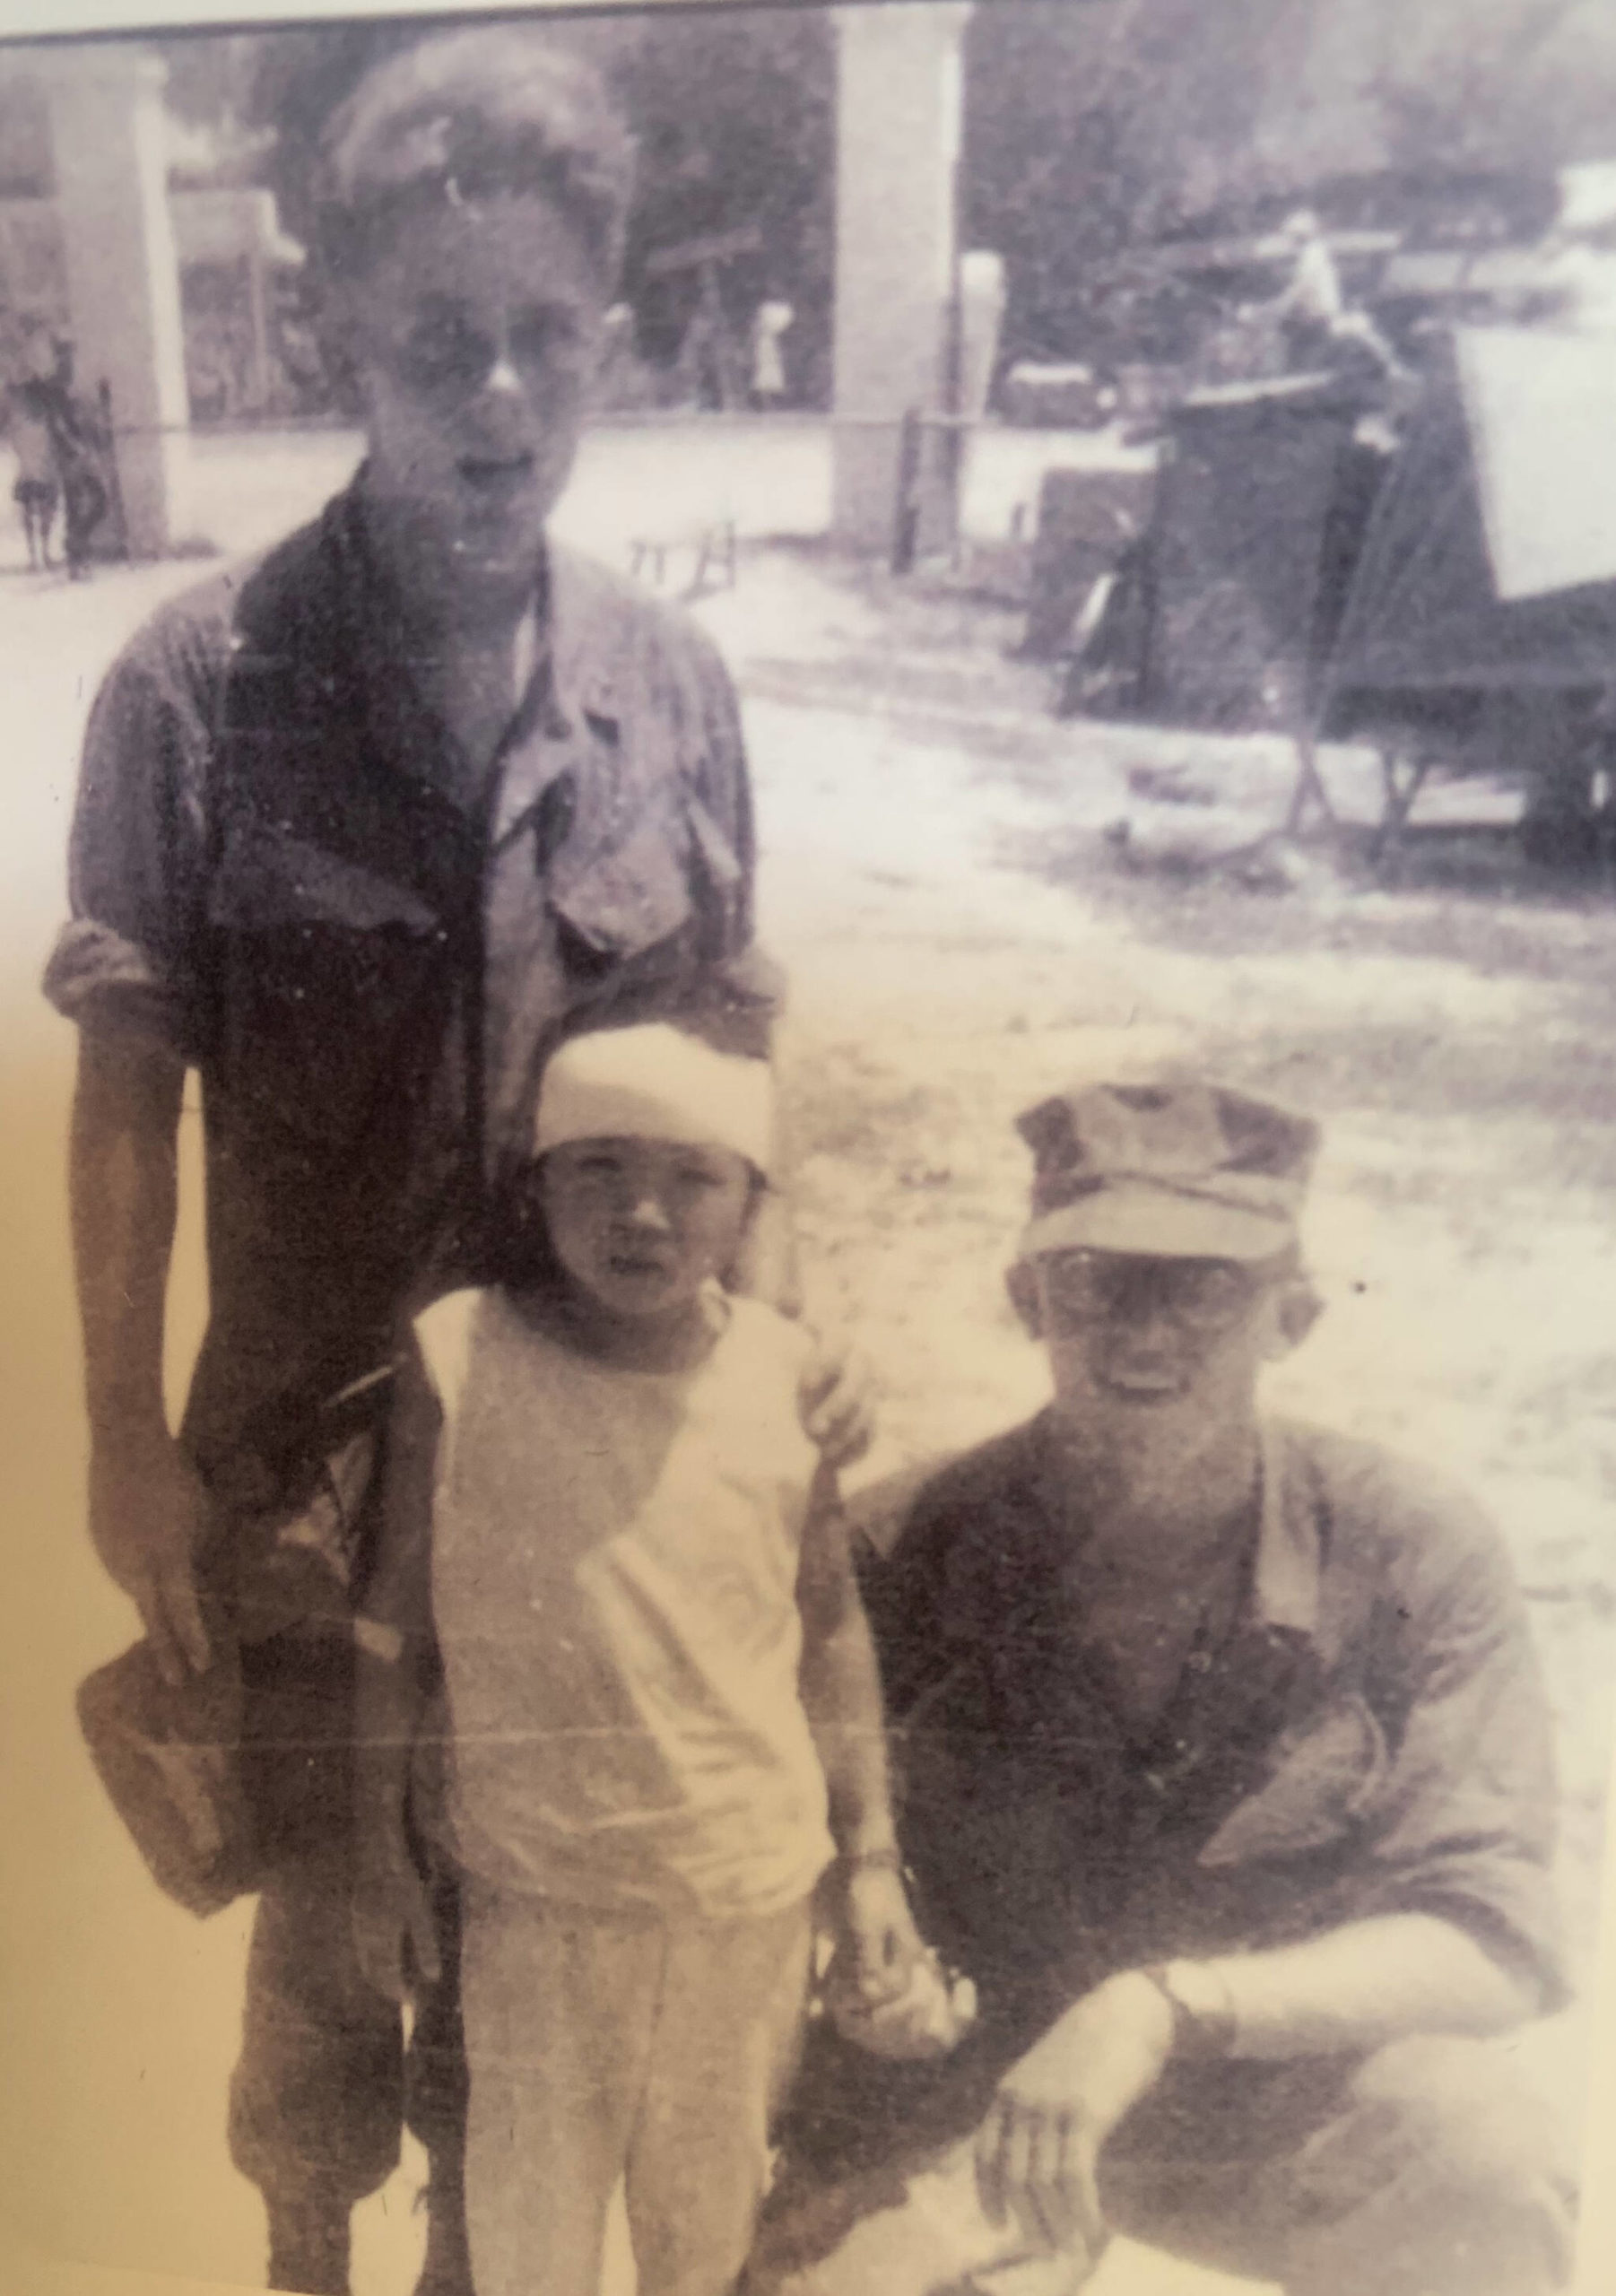 Cpl. Gary Squires kneals next to a young Vietnamese girl he helped rescue and the doctor who bandaged her wounds. (Photo provided by Gary Squires)